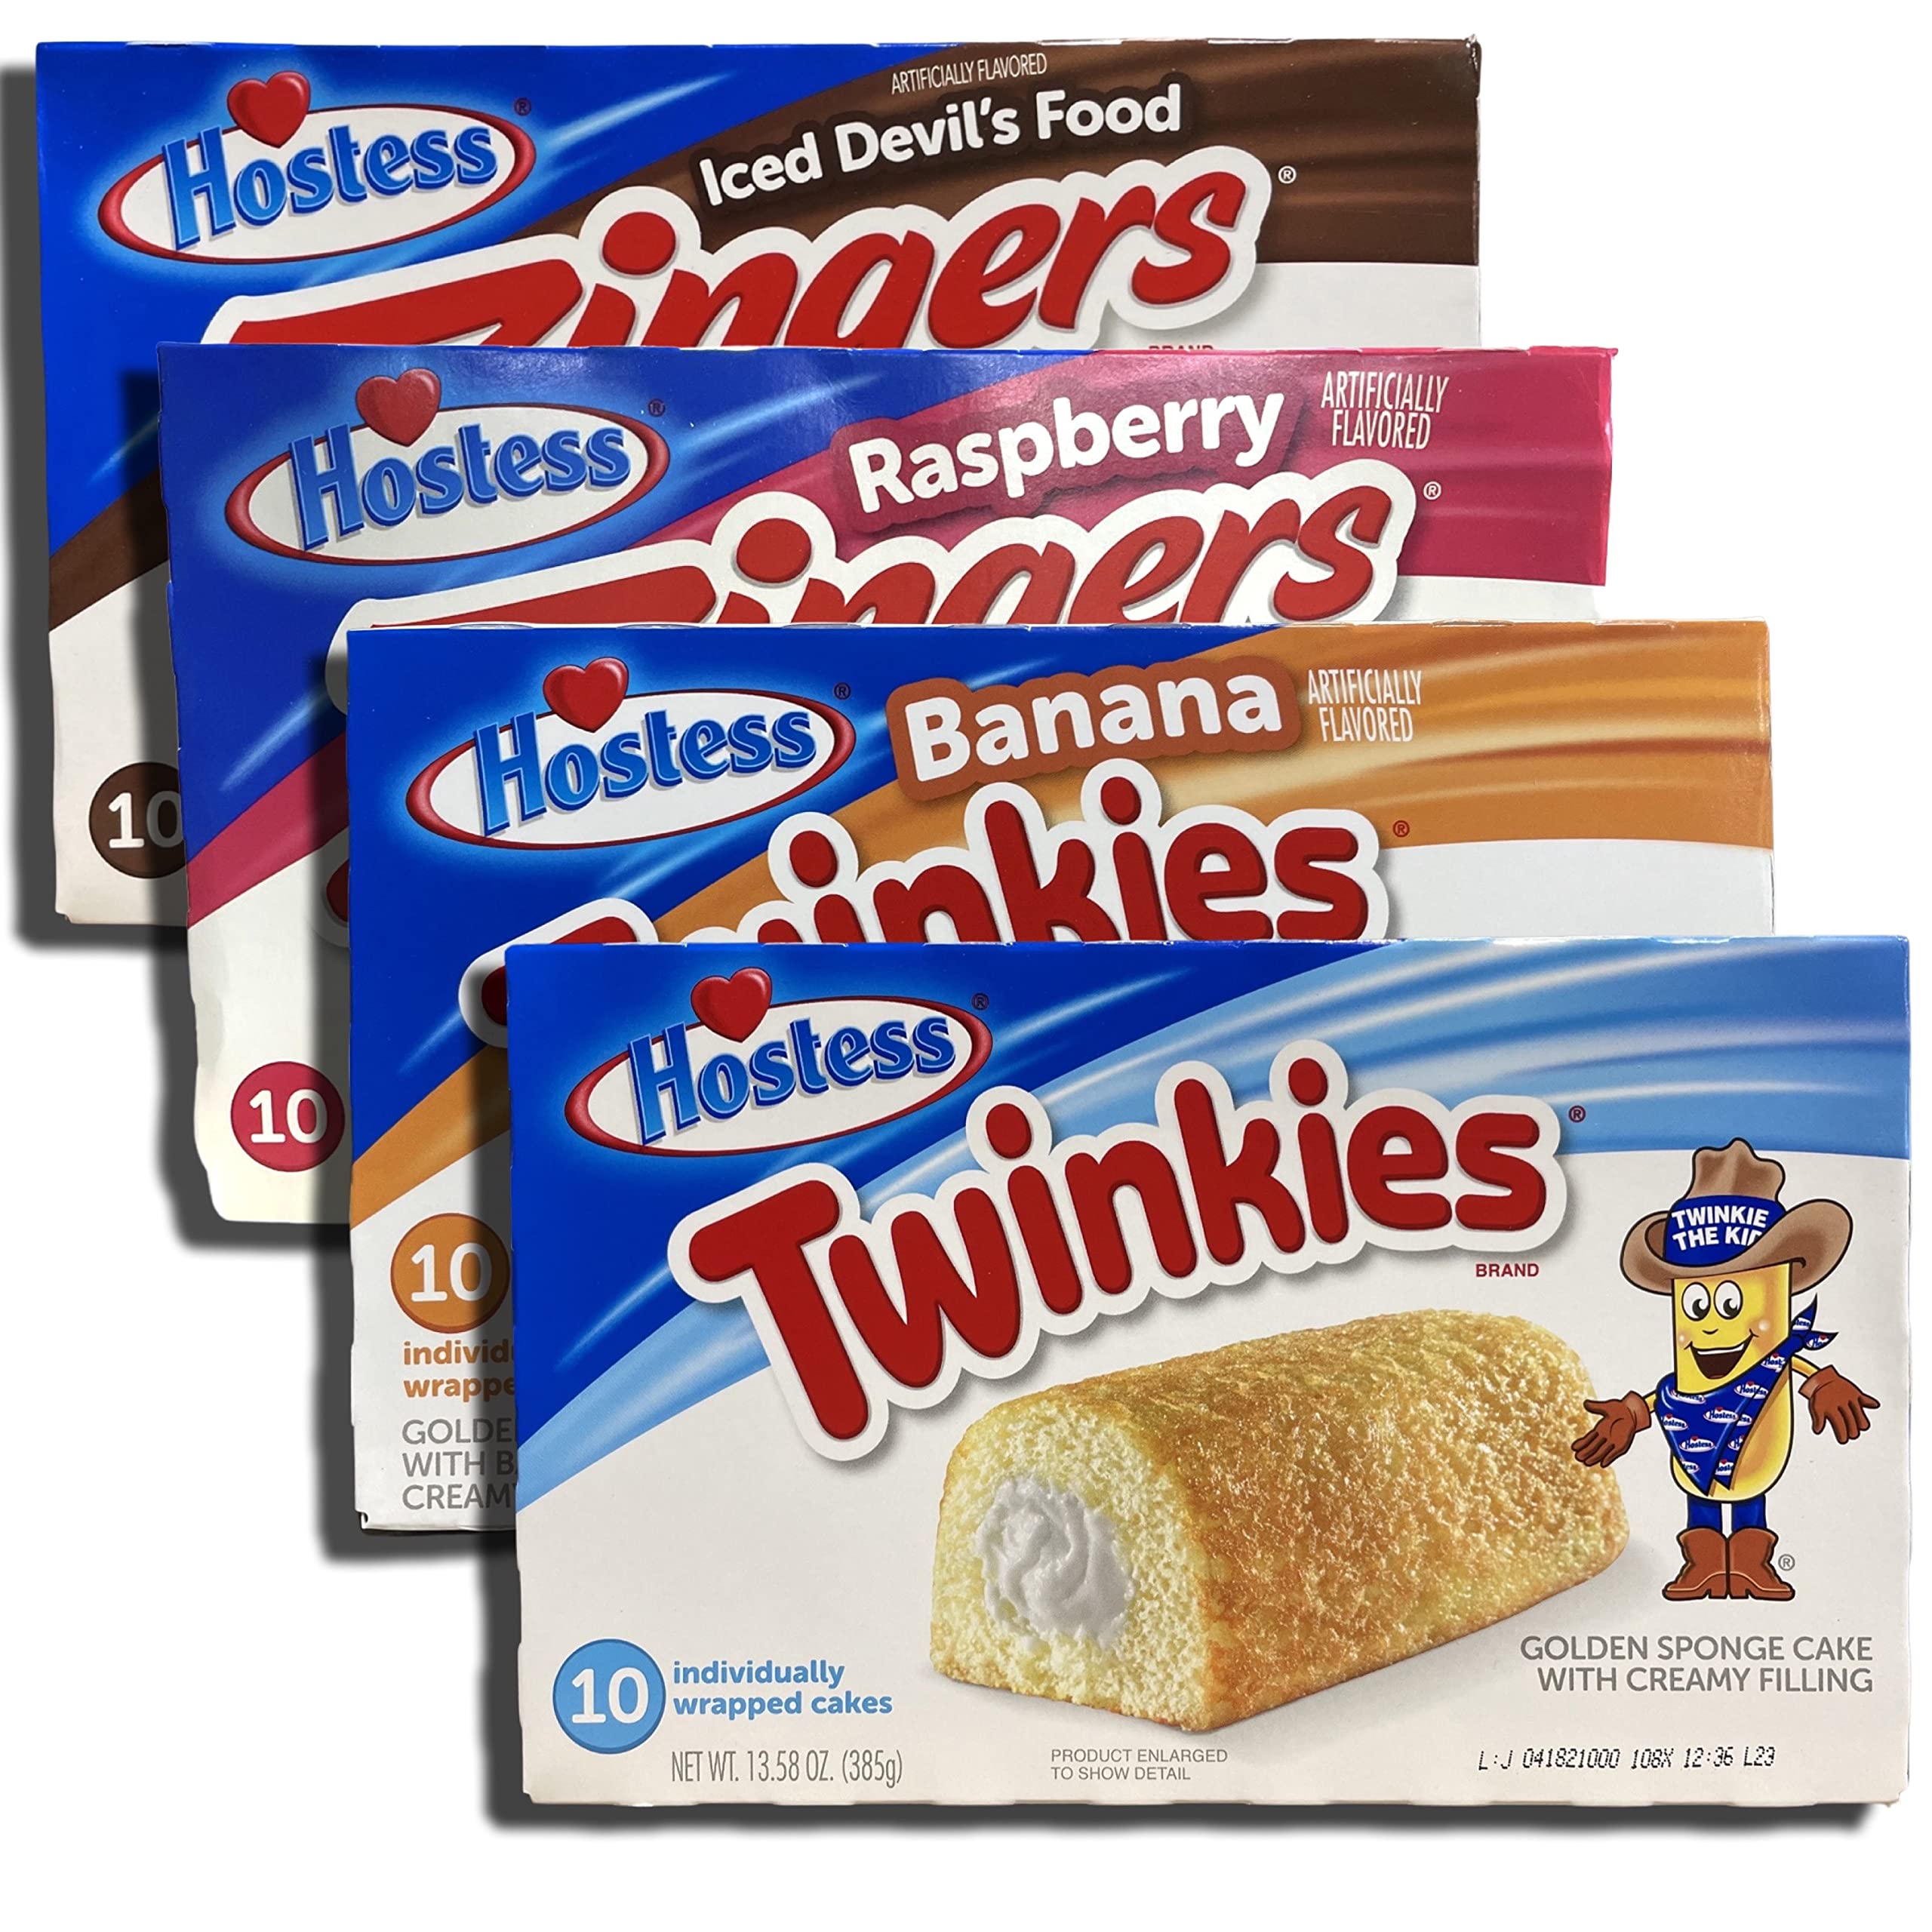 Ultimate twinkie variety pack with zingers four flavors original chocolate zingers banana berry zingers